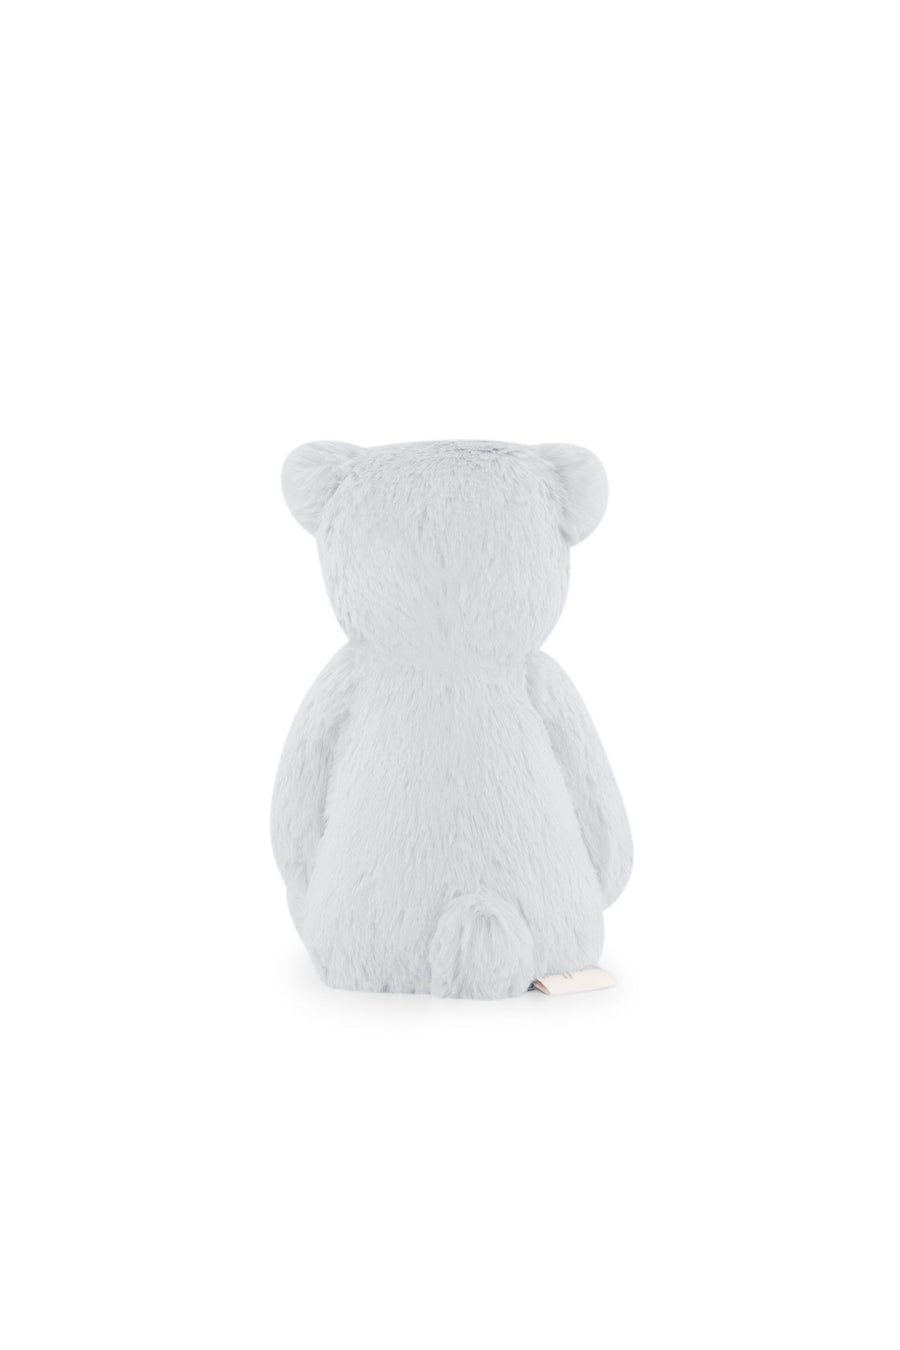 Snuggle Bunnies - George the Bear - Moonbeam Childrens Toy from Jamie Kay USA